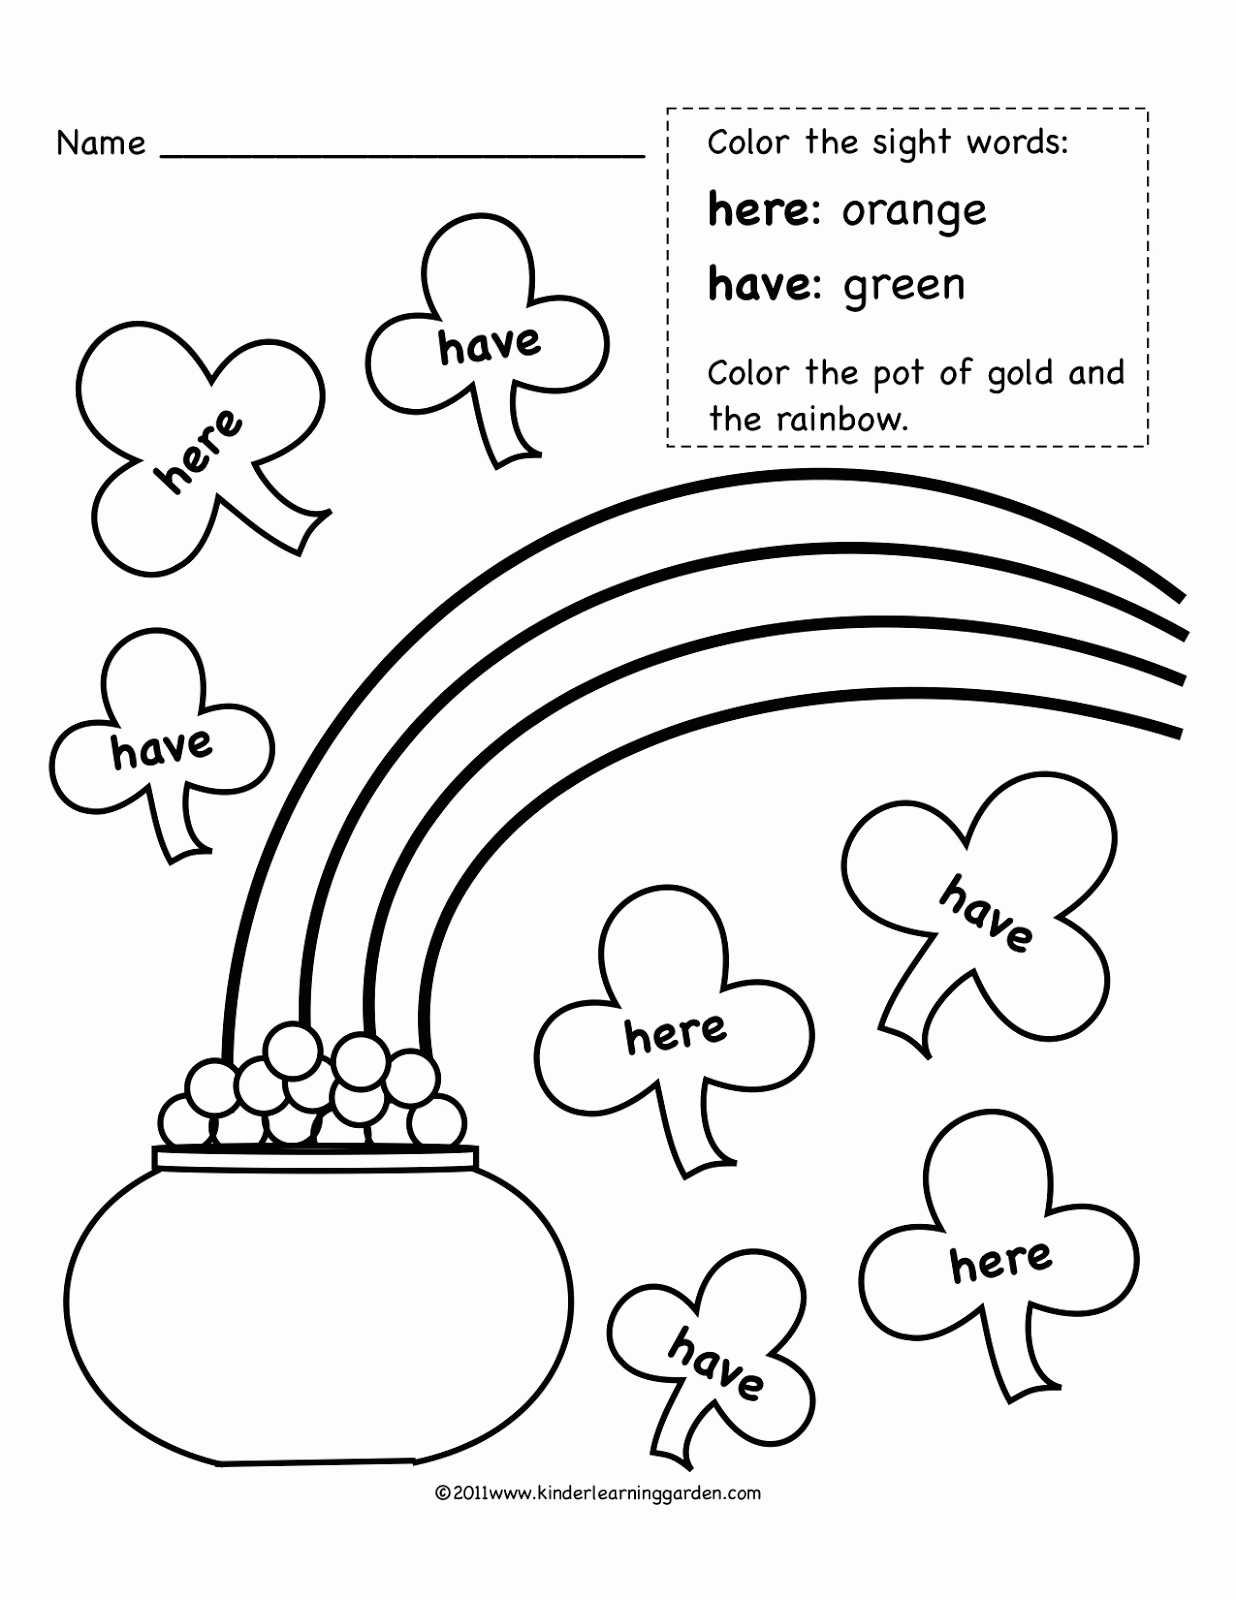 10 pics of kindergarten sight word coloring pages color